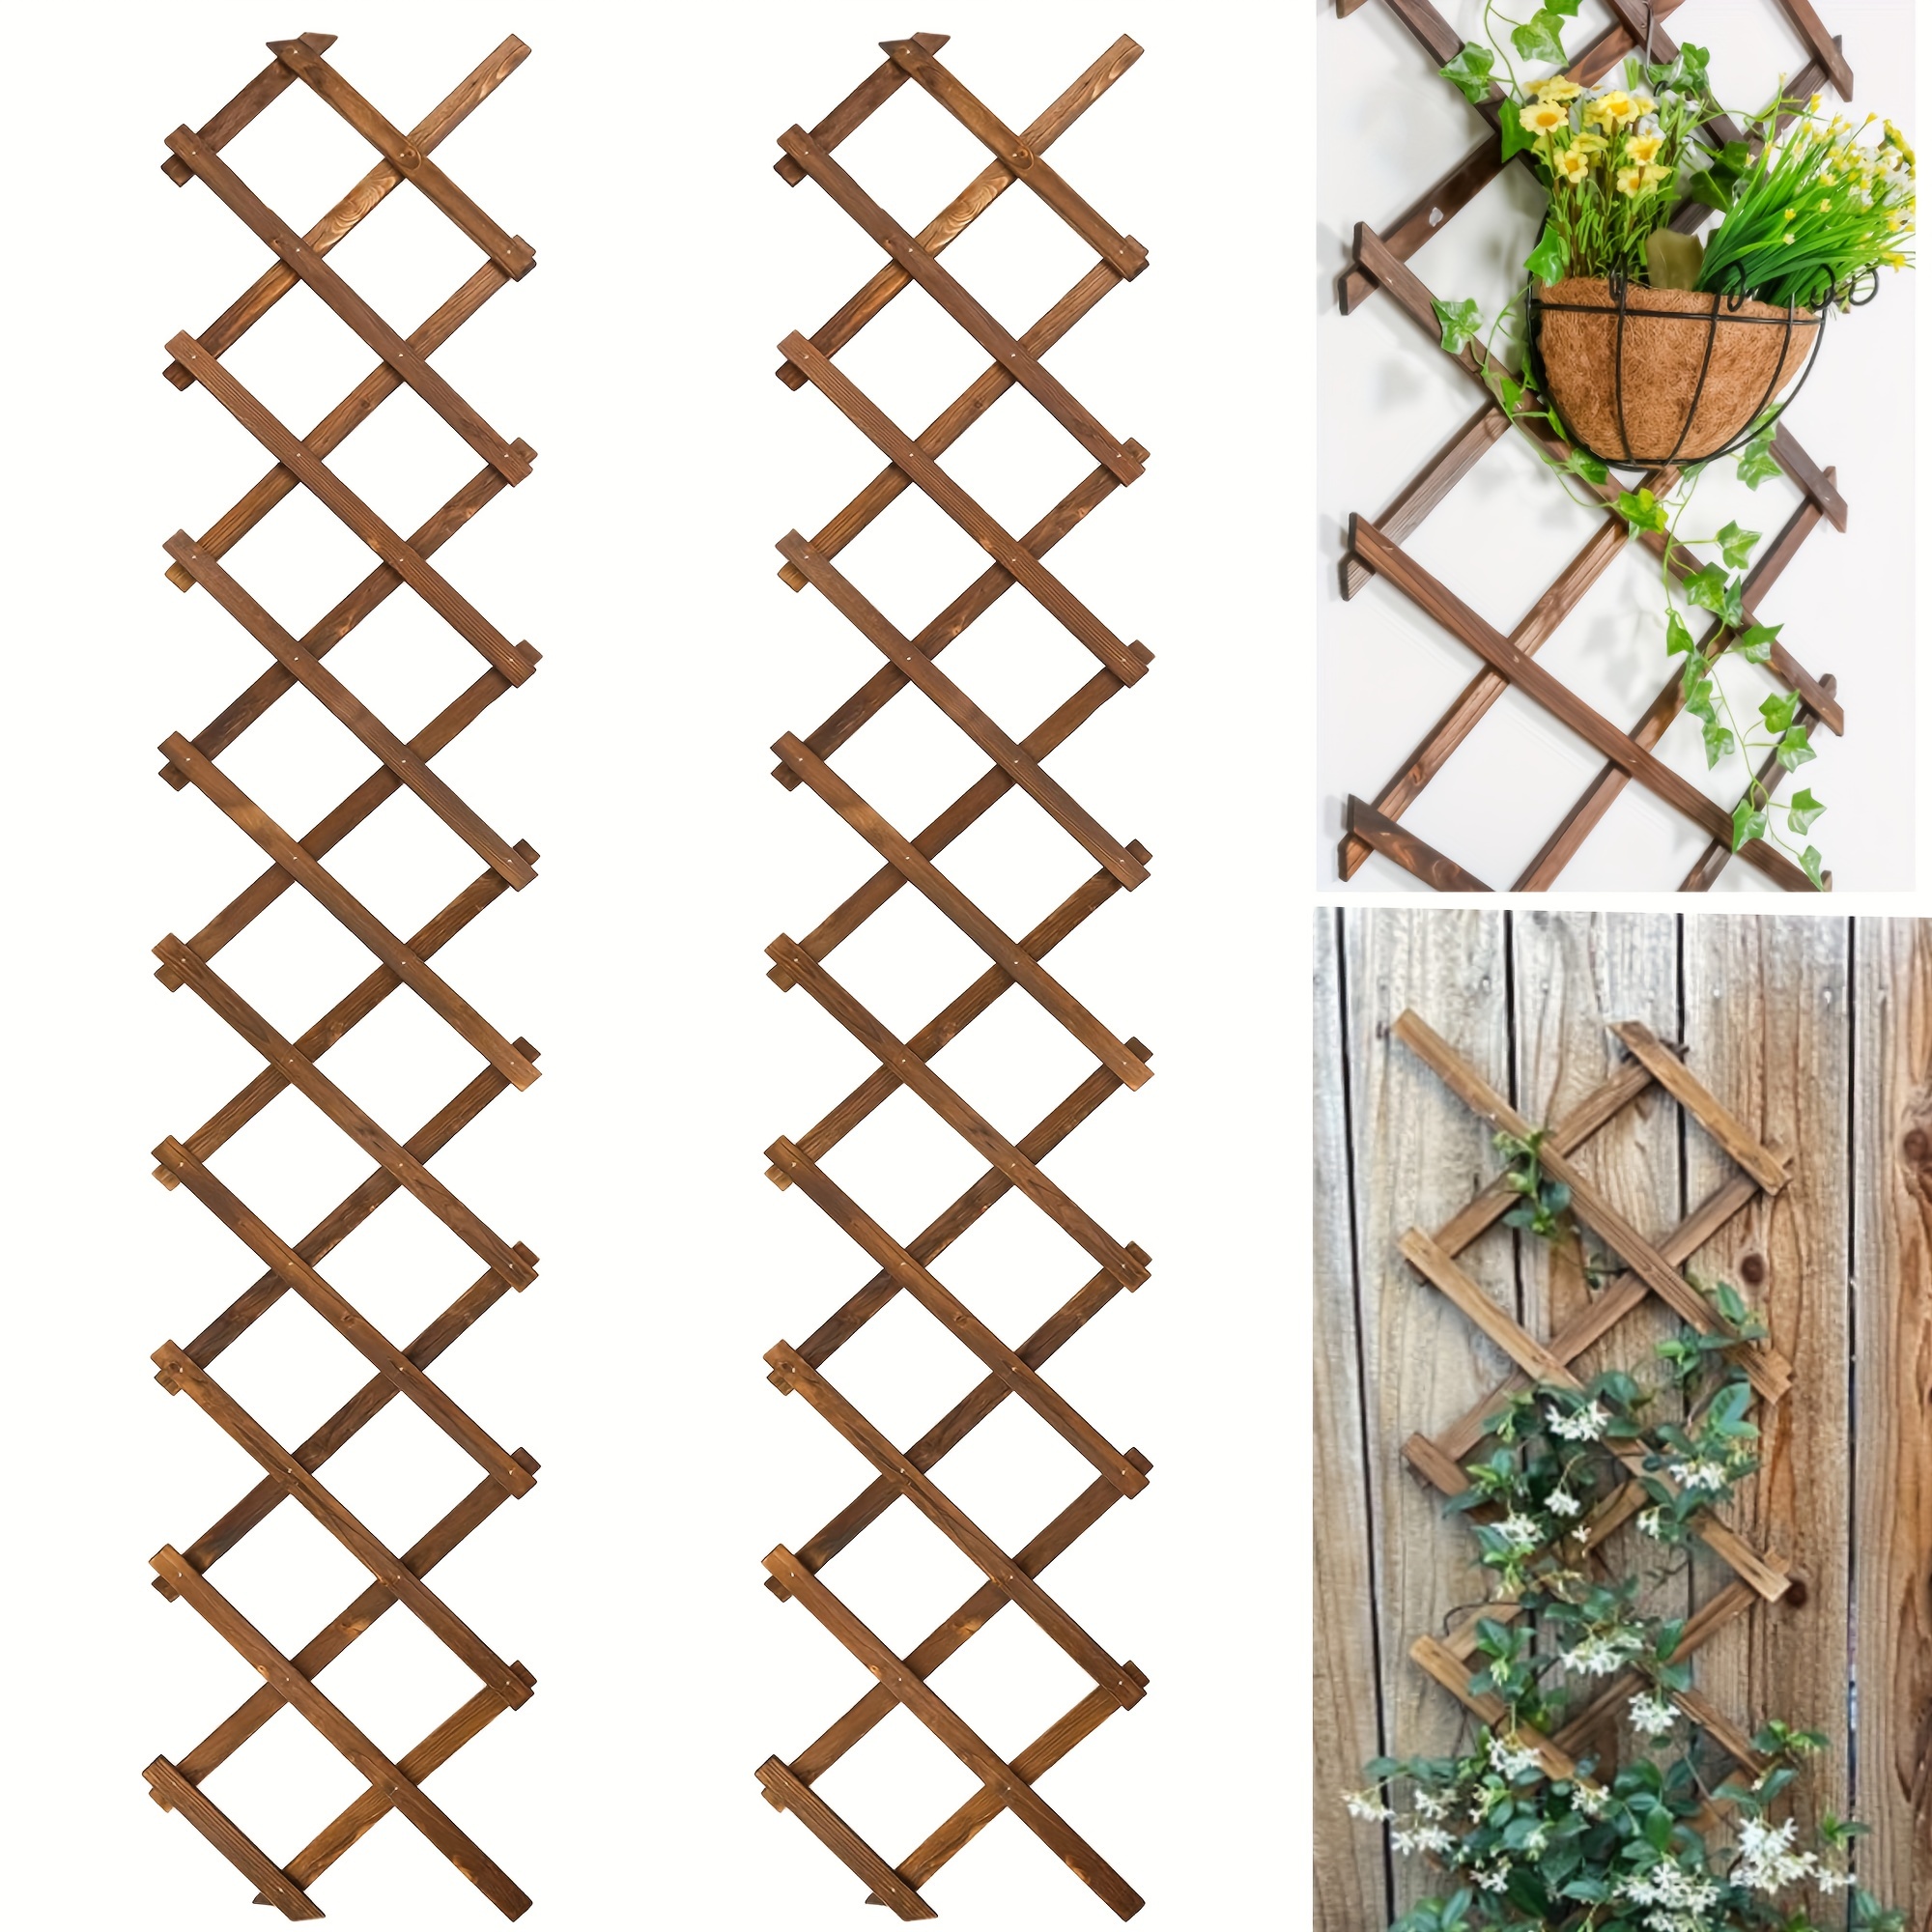 

Wooden Lattice Wall 2pack-expandable Plant Garden Trellis For Climbing Plants Outdoor Air Plant Vertical Rack Wall Decor For Room Patio